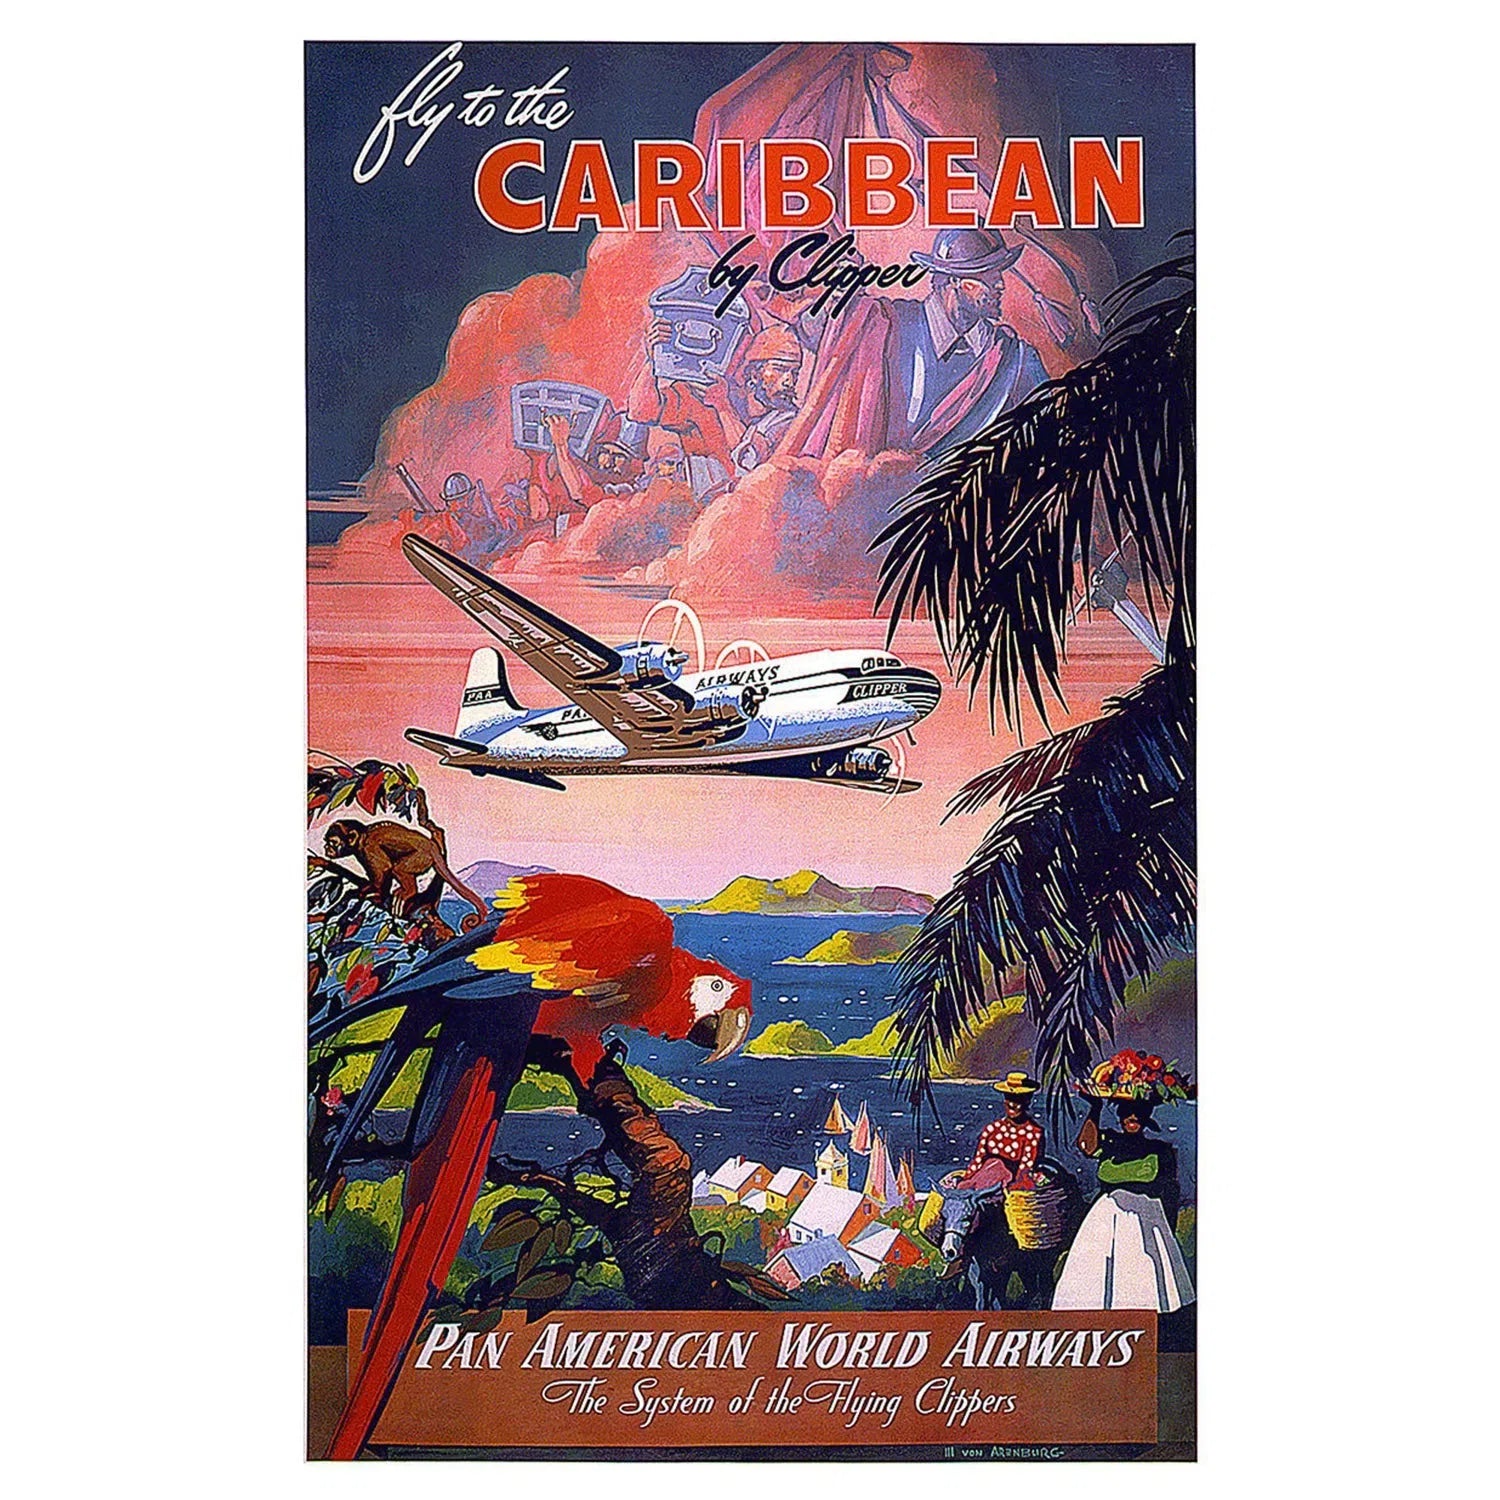 Fly to the Caribbean - Pan American World Airways-Imagesdartistes